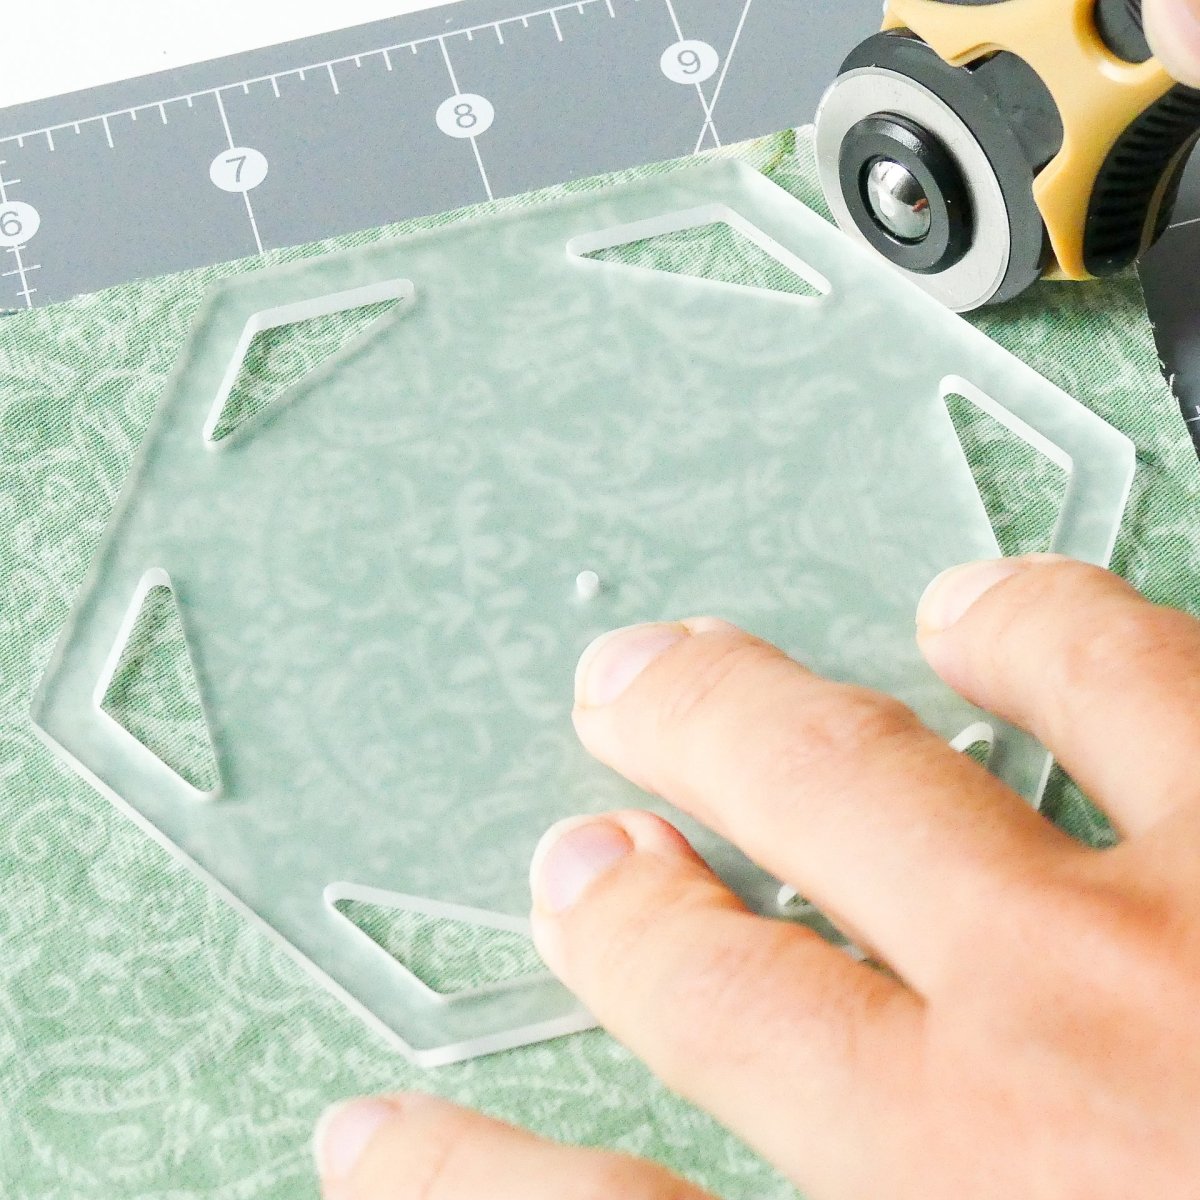 Rotary cutting around a hexagon template with rotary cutter